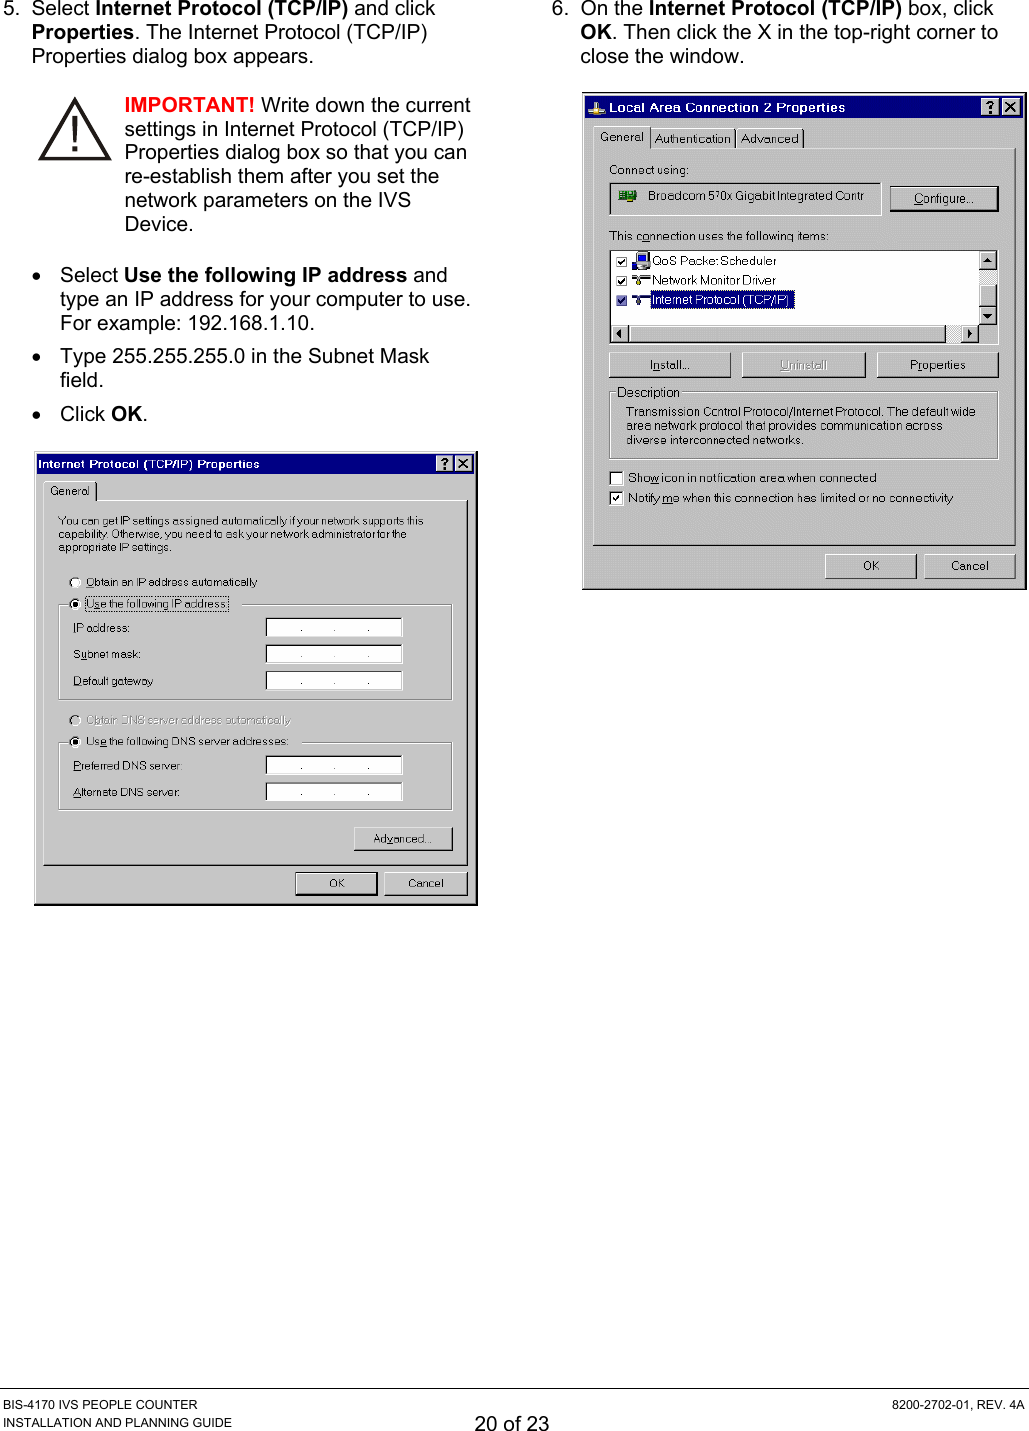  BIS-4170 IVS PEOPLE COUNTER  8200-2702-01, REV. 4A INSTALLATION AND PLANNING GUIDE 20 of 23 5. Select Internet Protocol (TCP/IP) and click Properties. The Internet Protocol (TCP/IP) Properties dialog box appears. IMPORTANT! Write down the current settings in Internet Protocol (TCP/IP) Properties dialog box so that you can re-establish them after you set the network parameters on the IVS Device. • Select Use the following IP address and type an IP address for your computer to use. For example: 192.168.1.10. •  Type 255.255.255.0 in the Subnet Mask field. • Click OK.  6. On the Internet Protocol (TCP/IP) box, click OK. Then click the X in the top-right corner to close the window.  